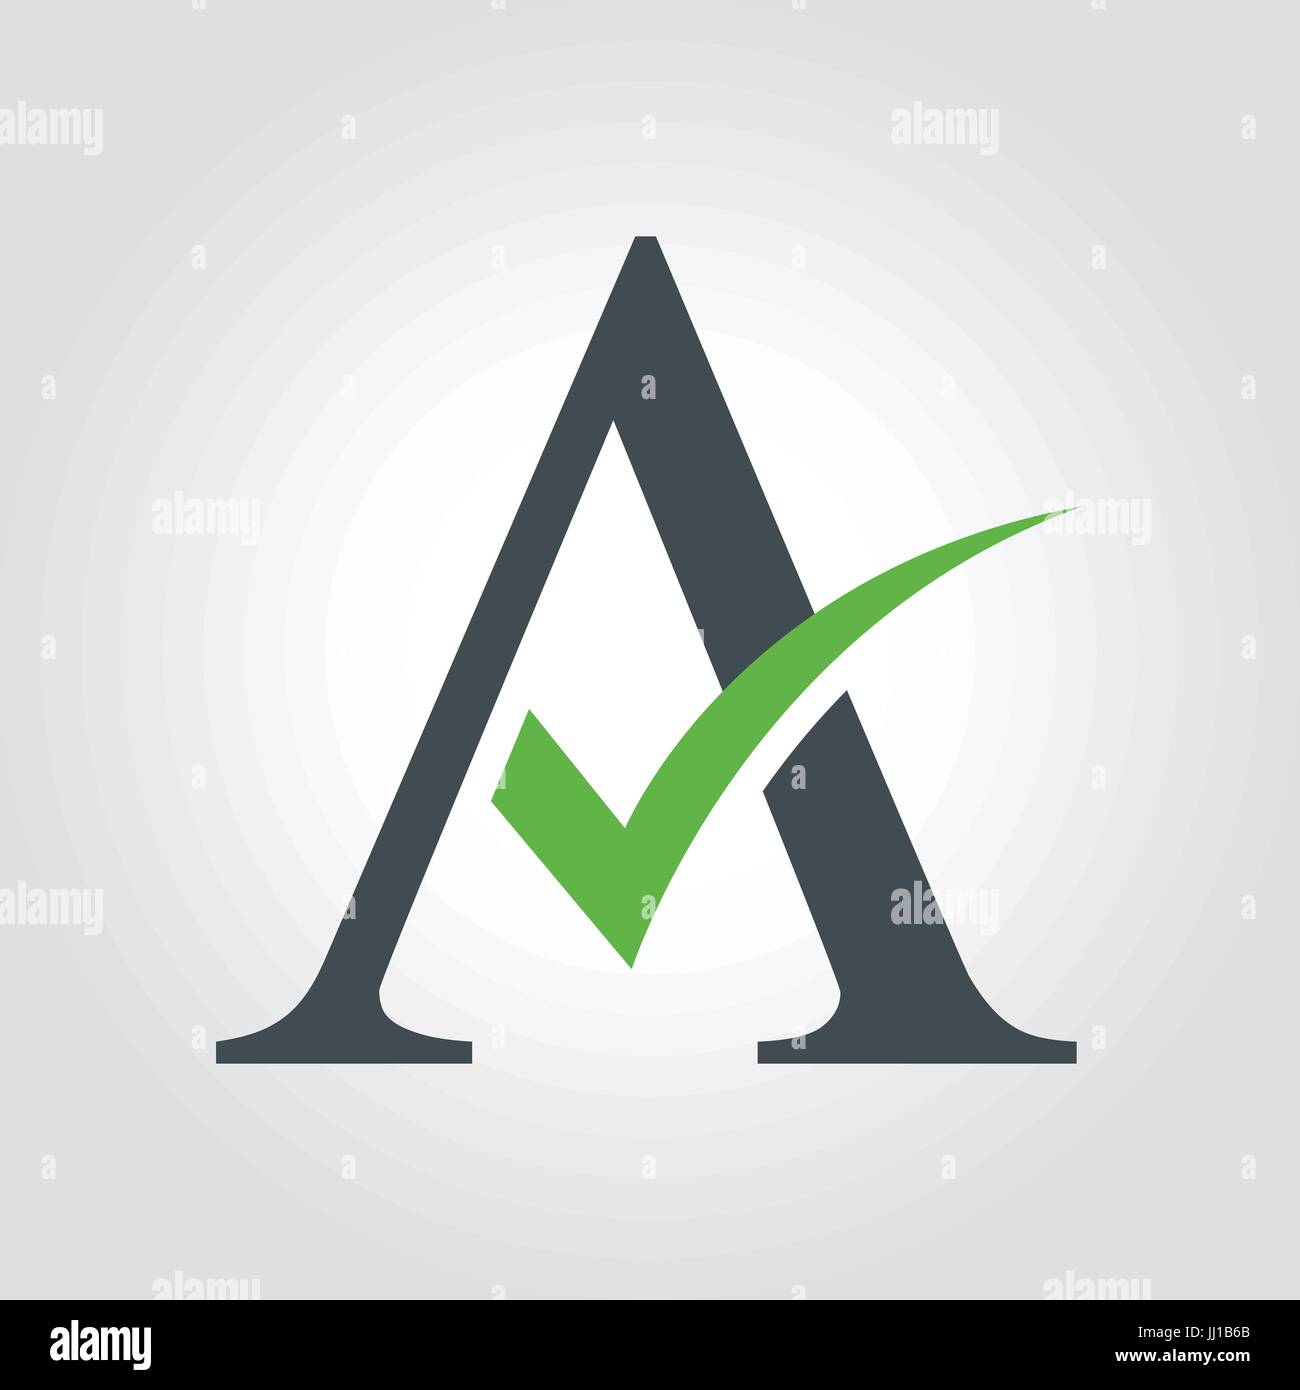 Letter A logo typography design template Stock Vector